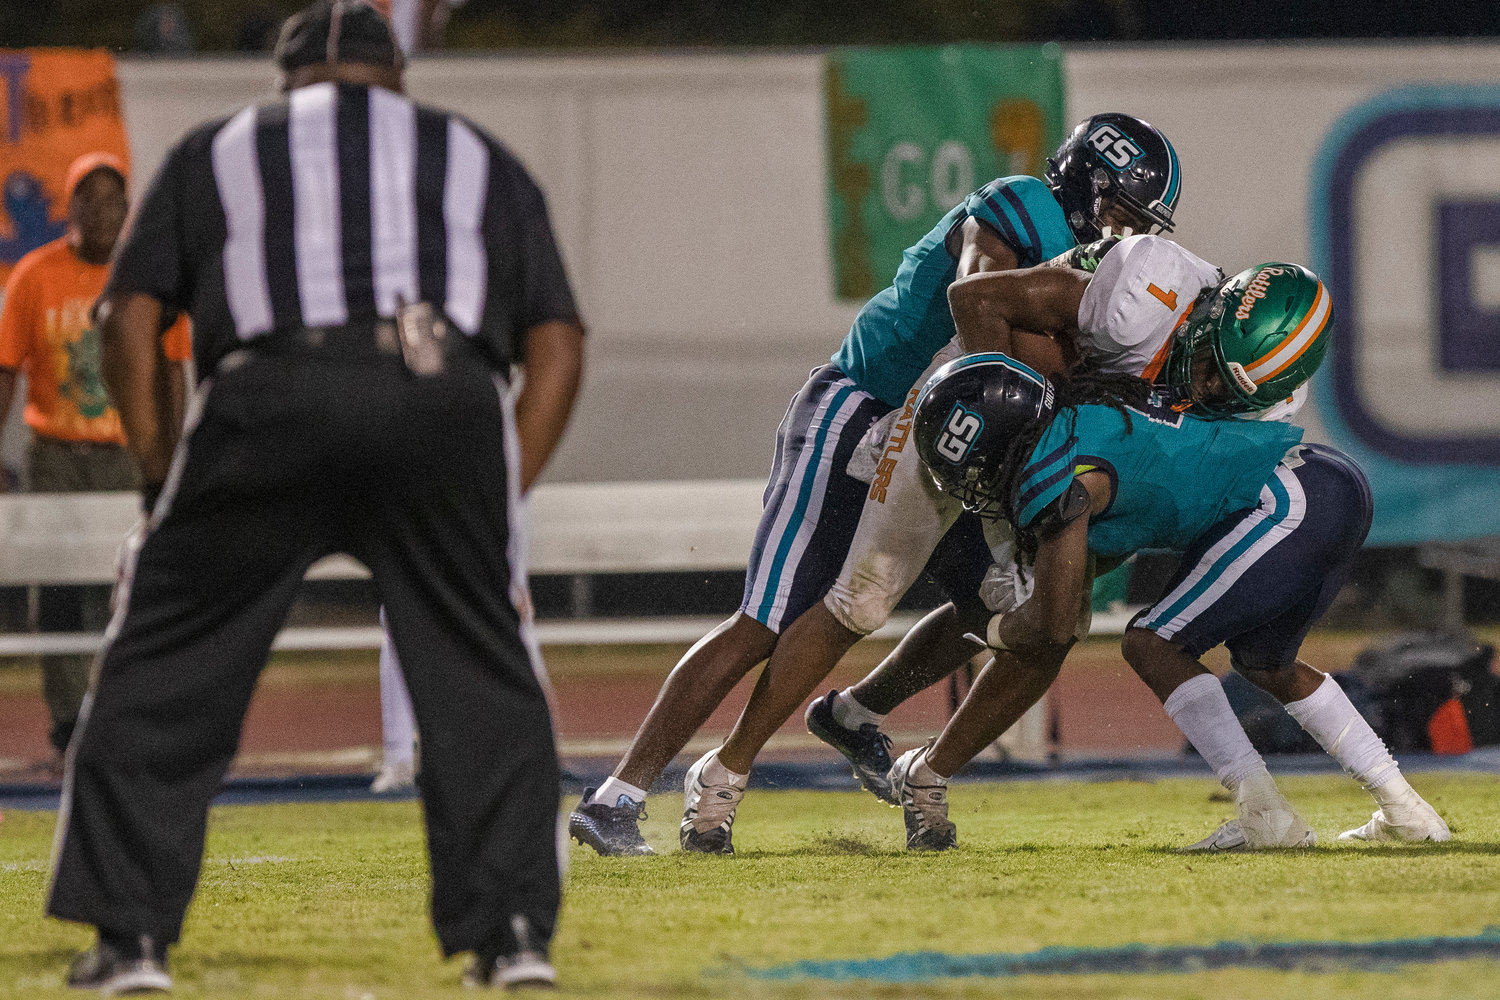 The Gulf Shores defense rallies for a stop during the Dolphins’ homecoming contest against the LeFlore Rattlers at home Sept. 16. Gulf Shores returns home Thursday to host the Elberta Warriors for another region battle.